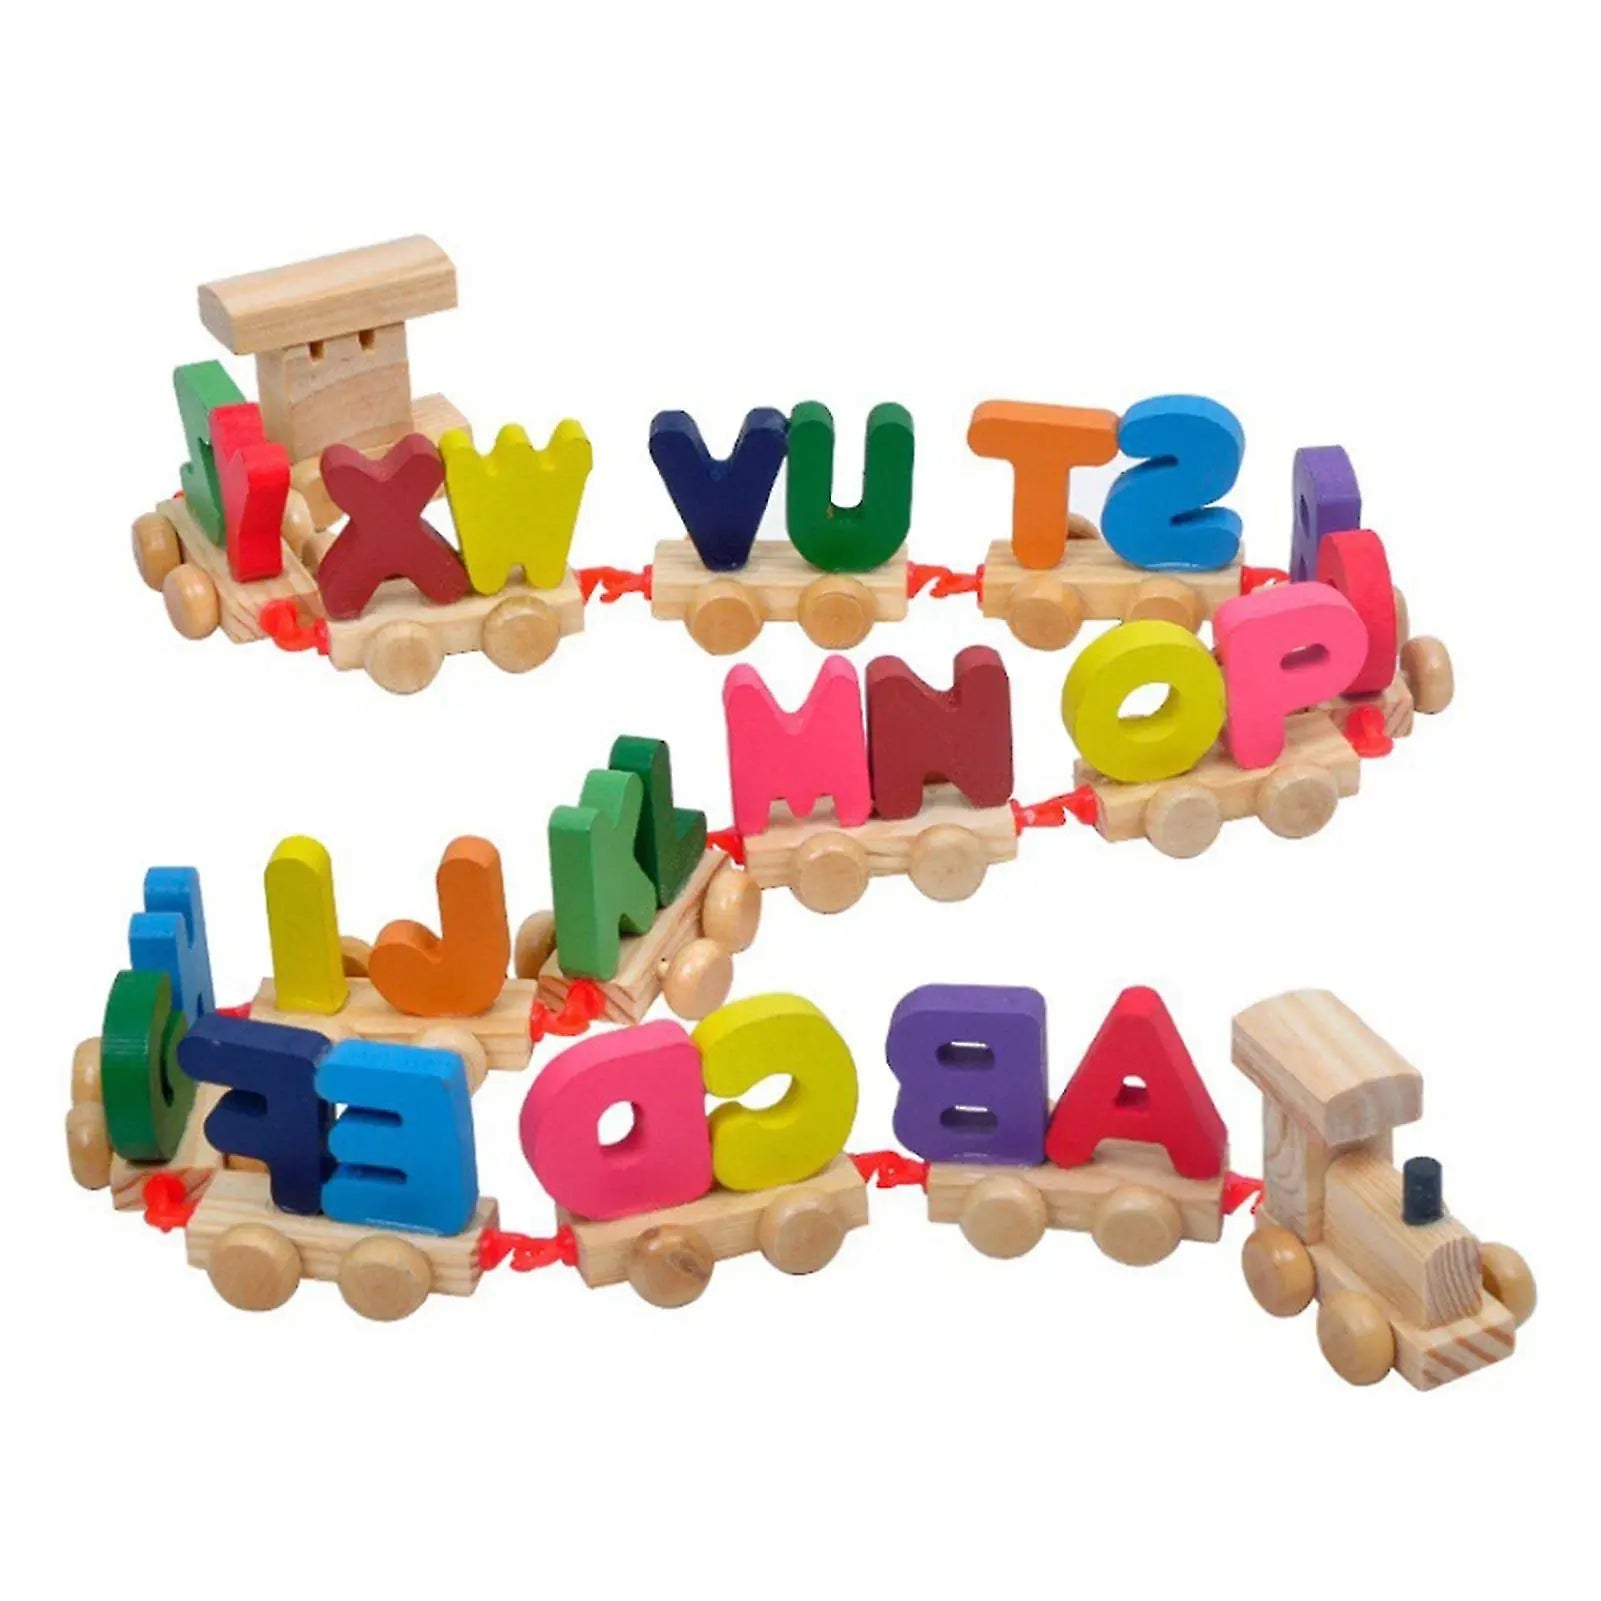 Wooden Pair ABCD Train - A to Z Train Alphabet Train Toy - MyLittleTales